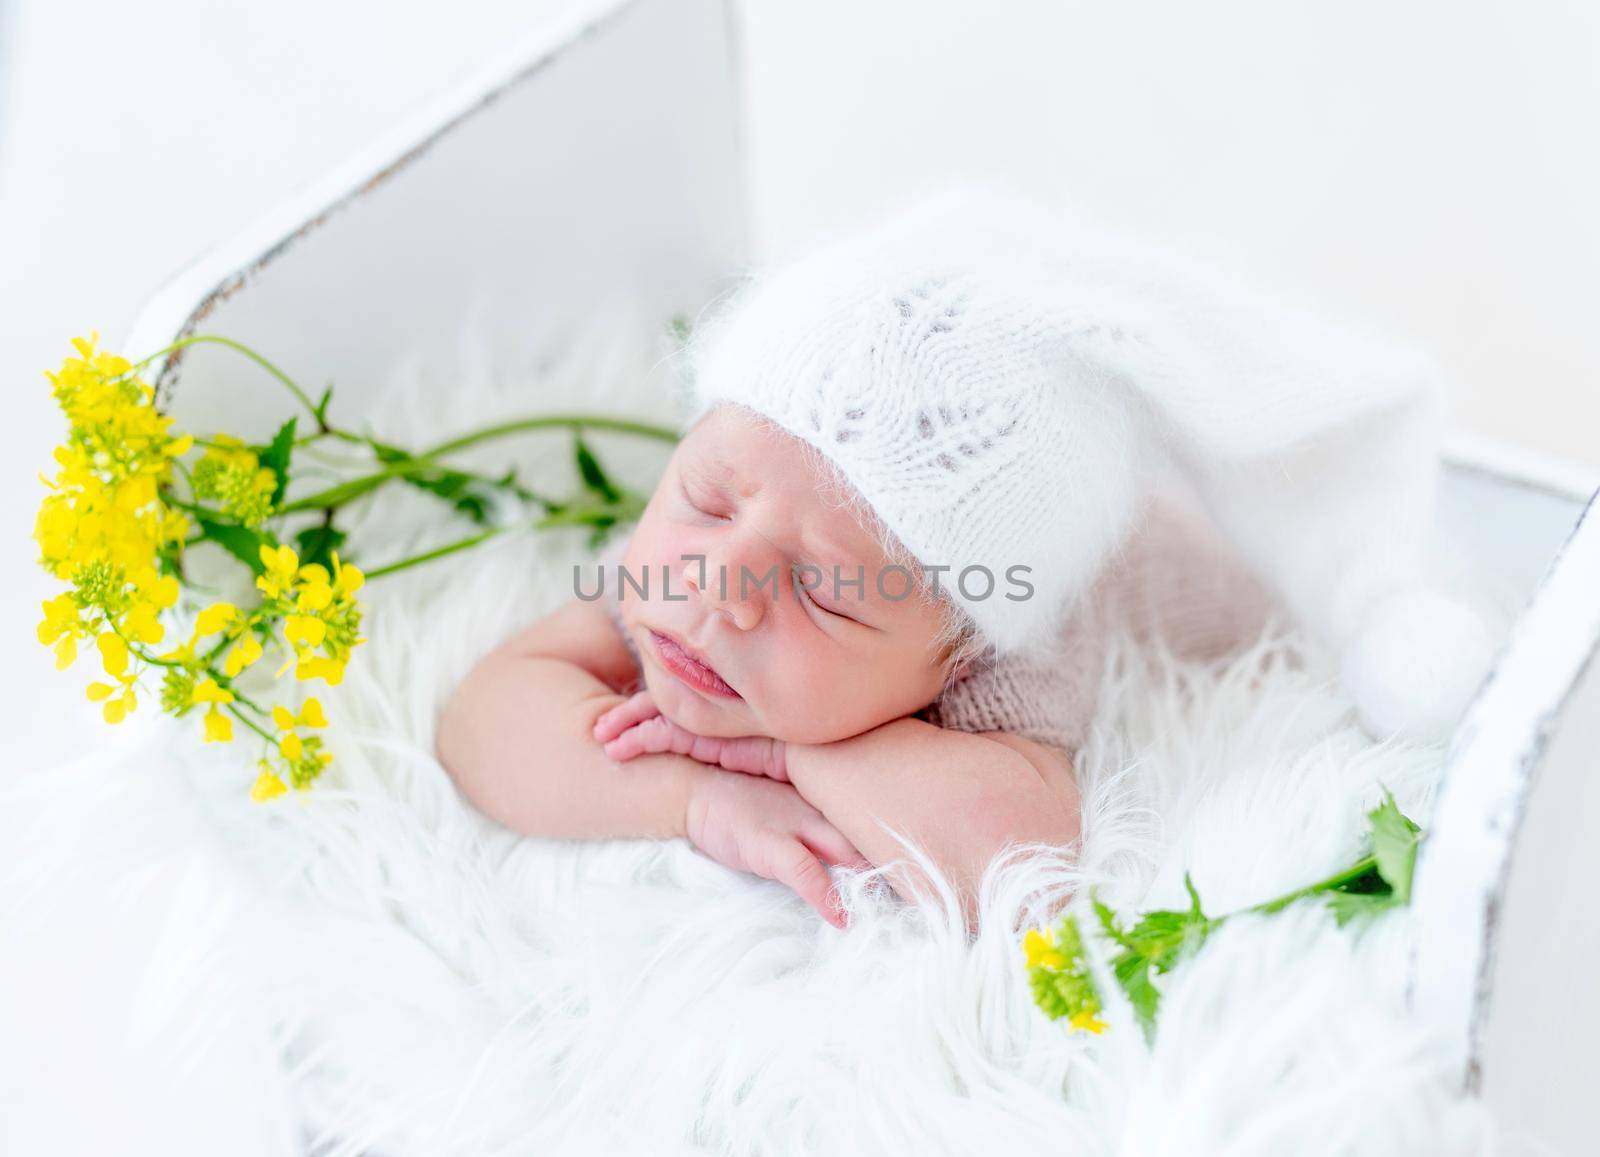 Portrait of adorable newborn baby boy sleeping on his tummy and holding his hands under cheeks in white wooden bed with yellow flowers. Cute infant kid wearing knitted hat napping